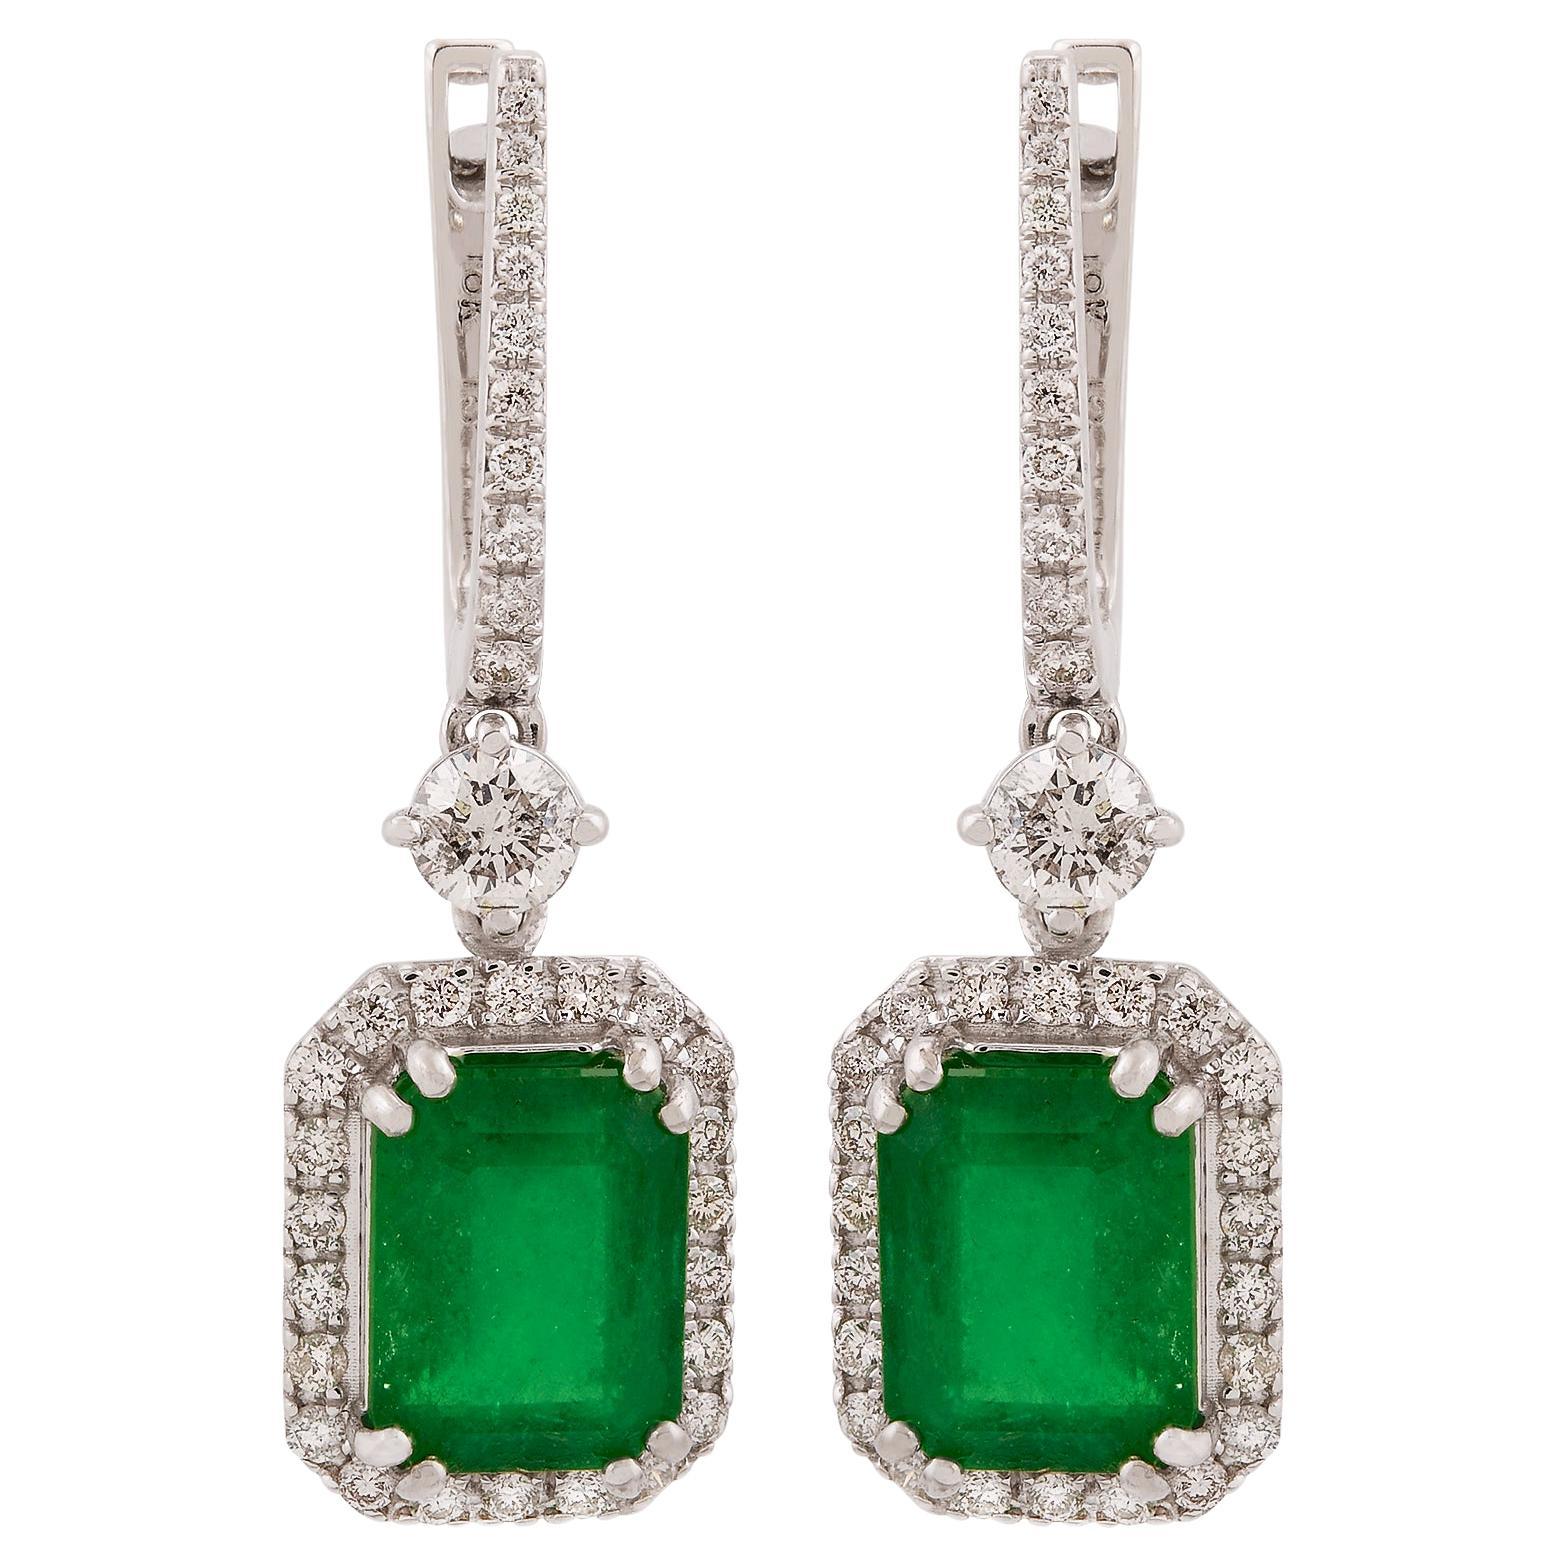 Real Emerald Dangle Earrings 18k White Gold SI Clarity HI Color Diamond Jewelry For Sale